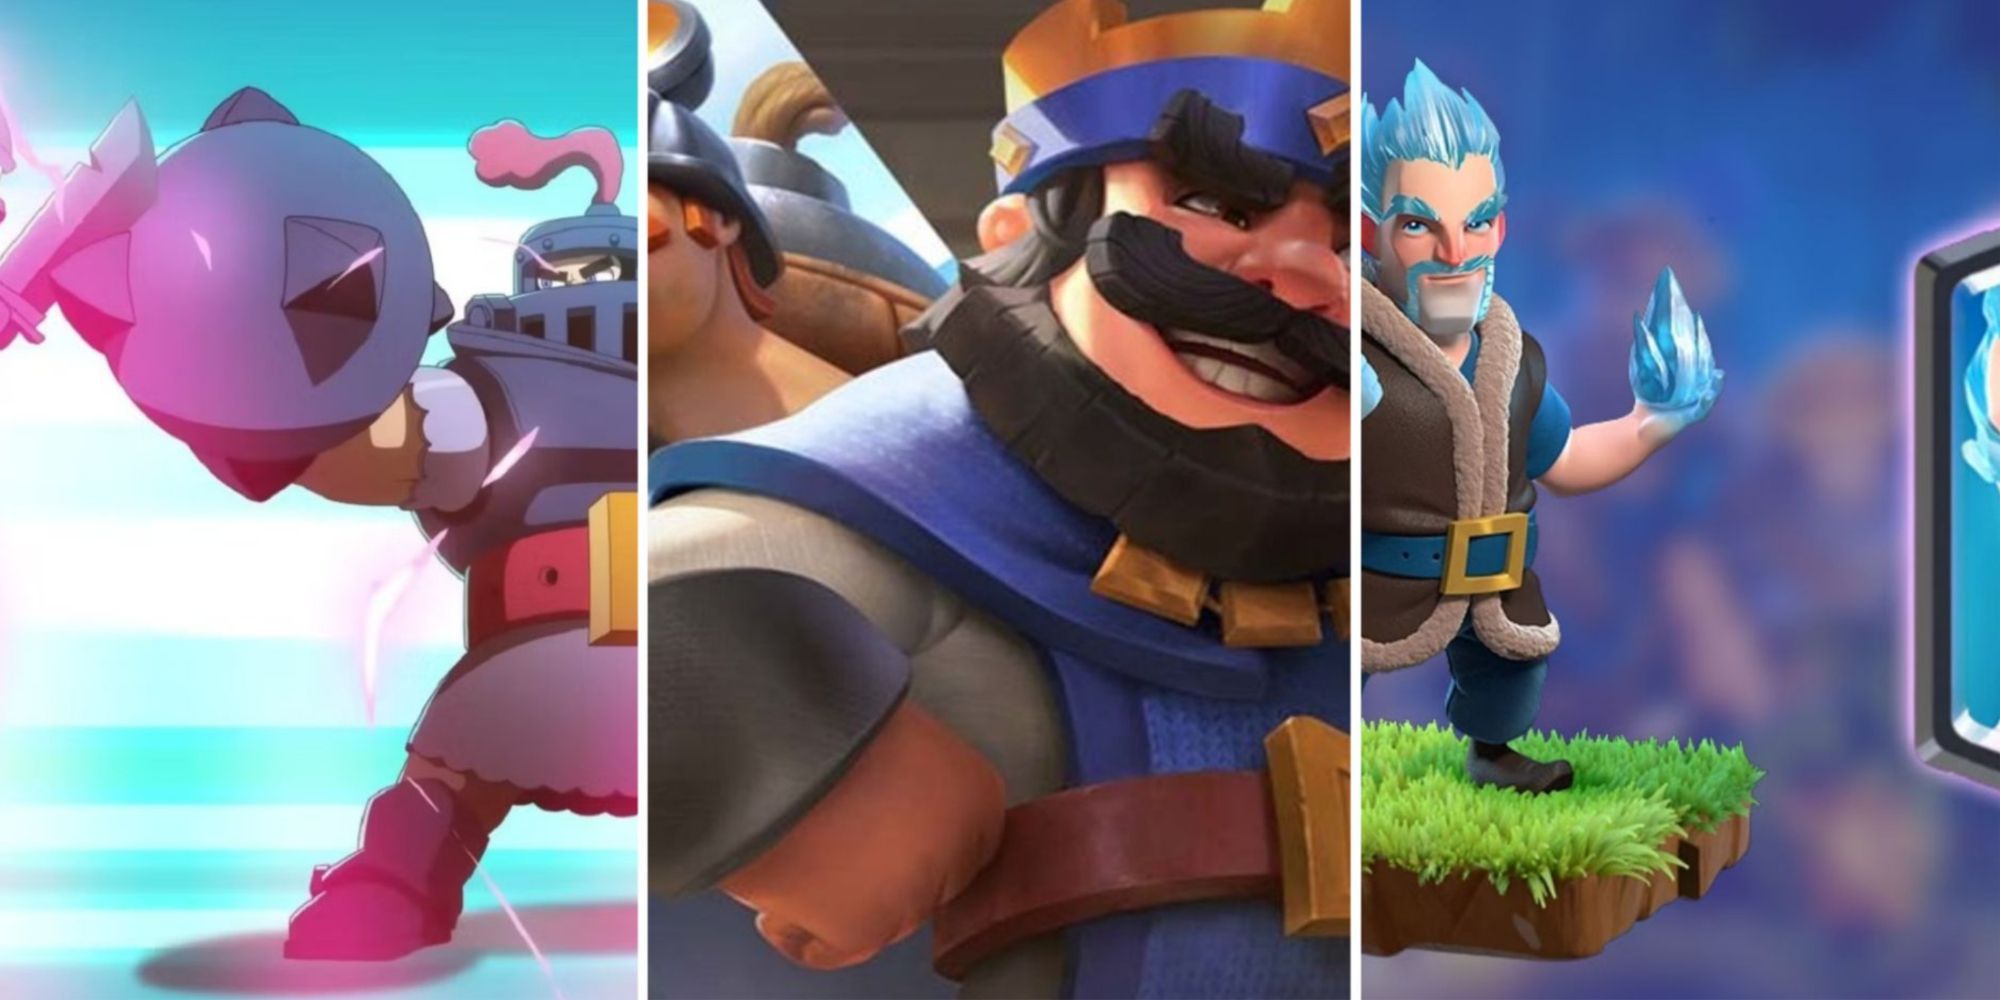 Legendary Cards in Clash Royale